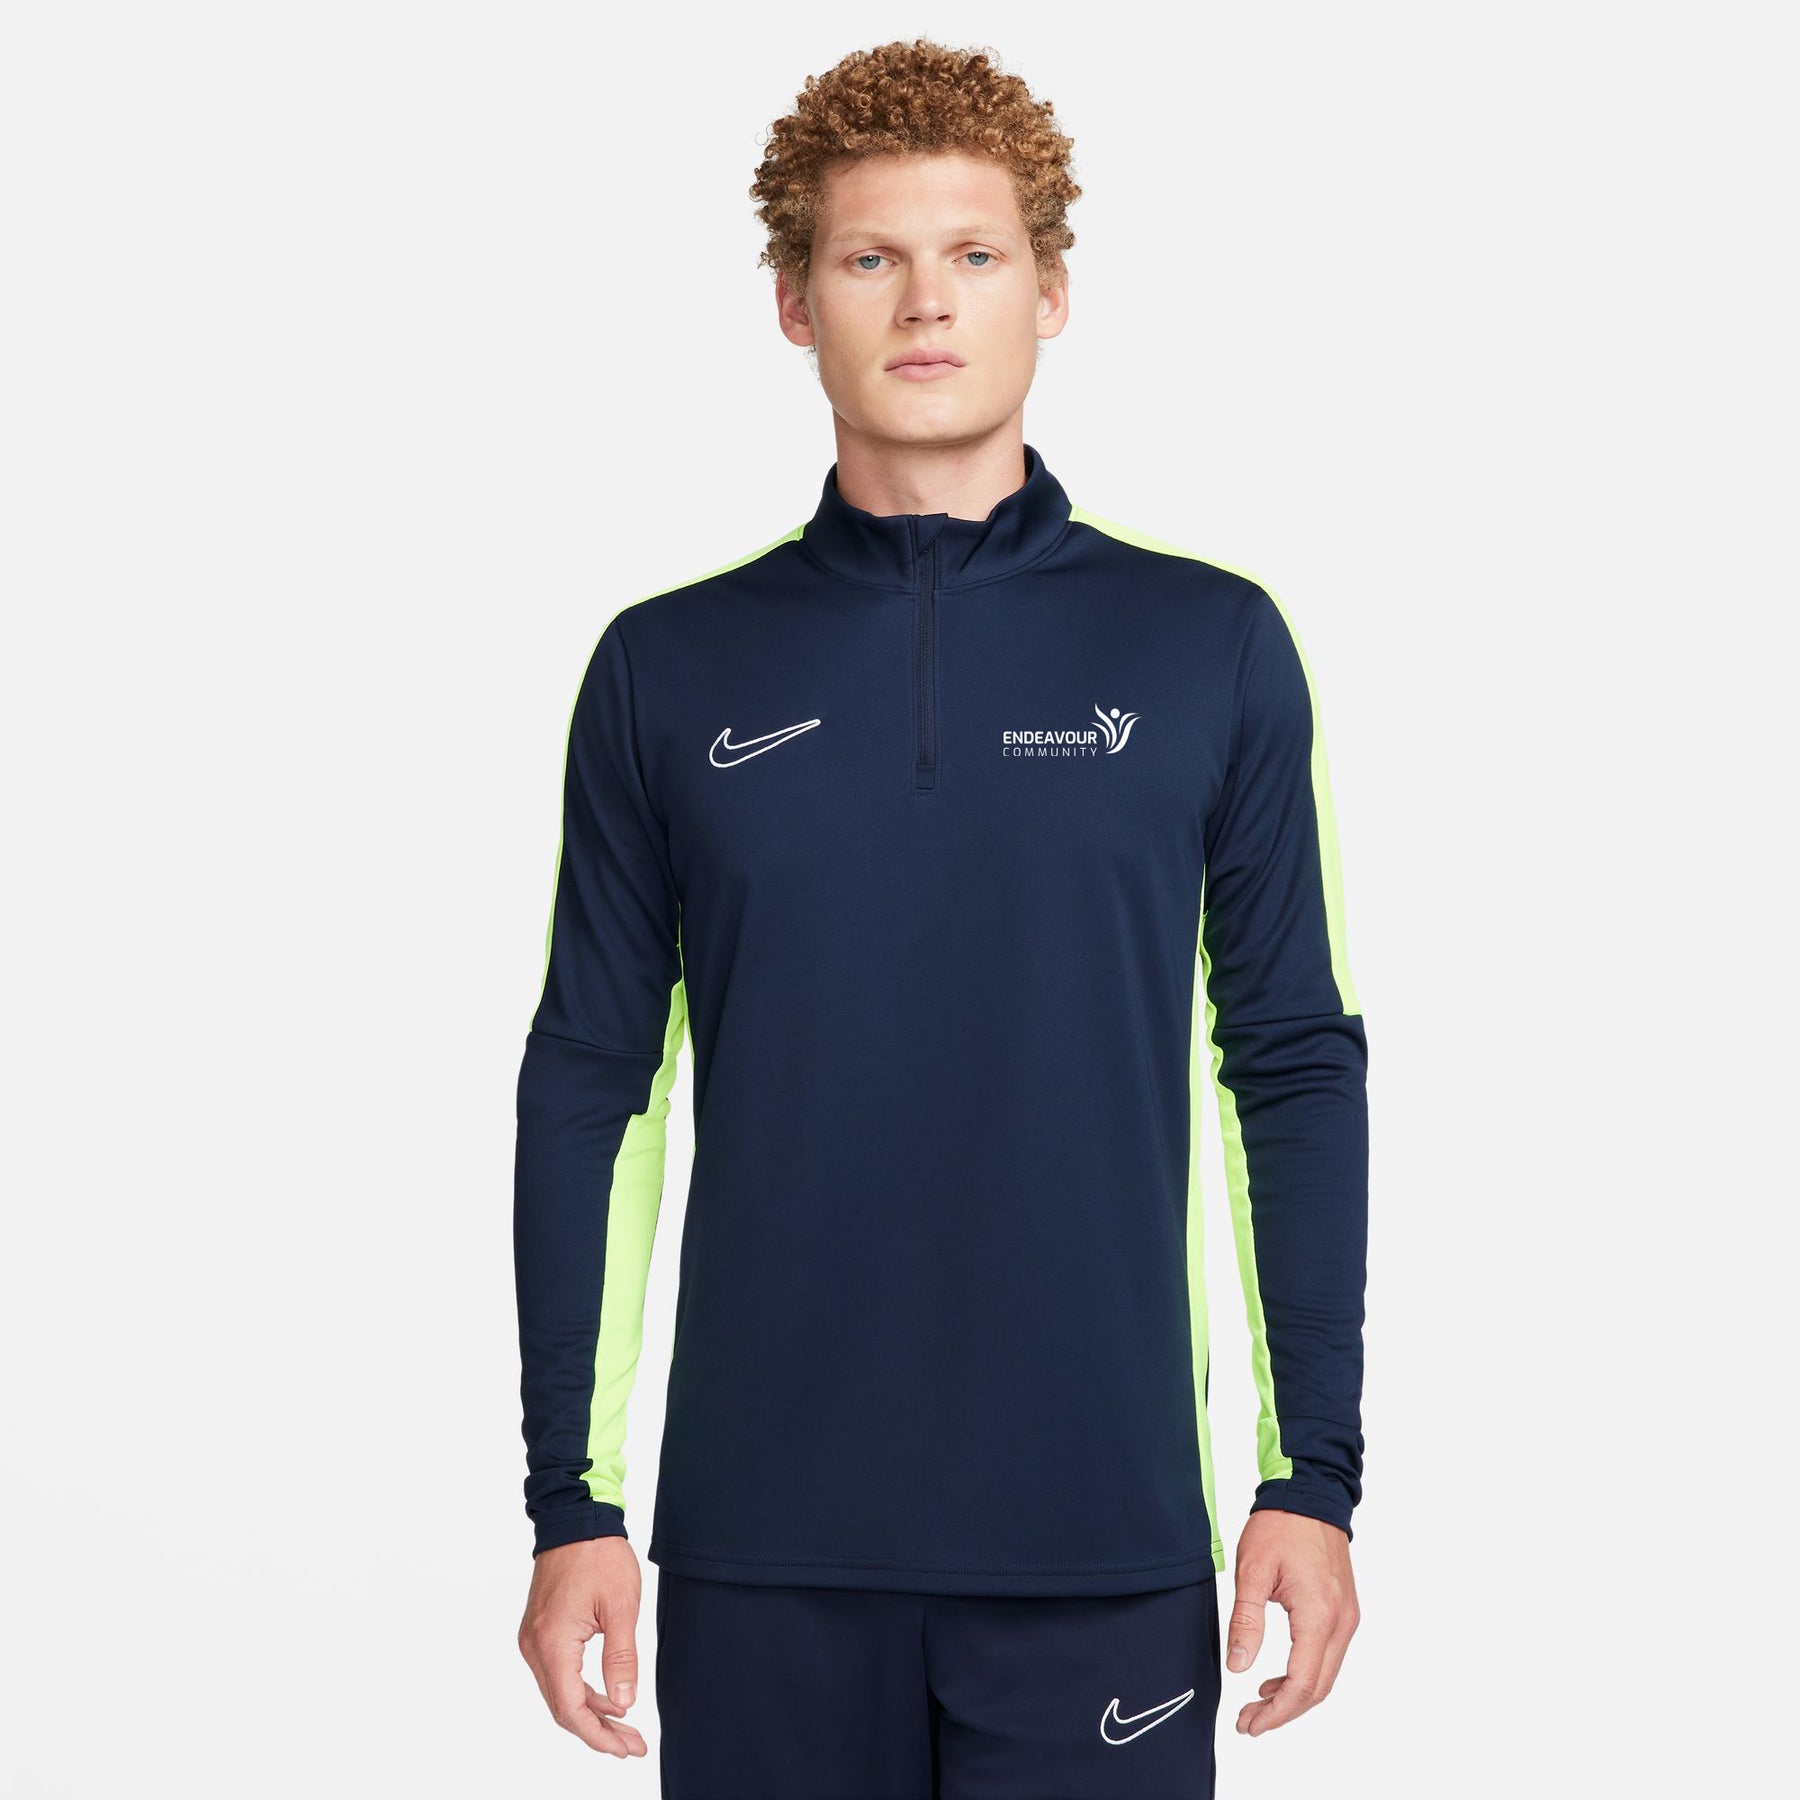 Endeavour Community - Nike Dry-Fit Academy 23 Drill Top (Mens)